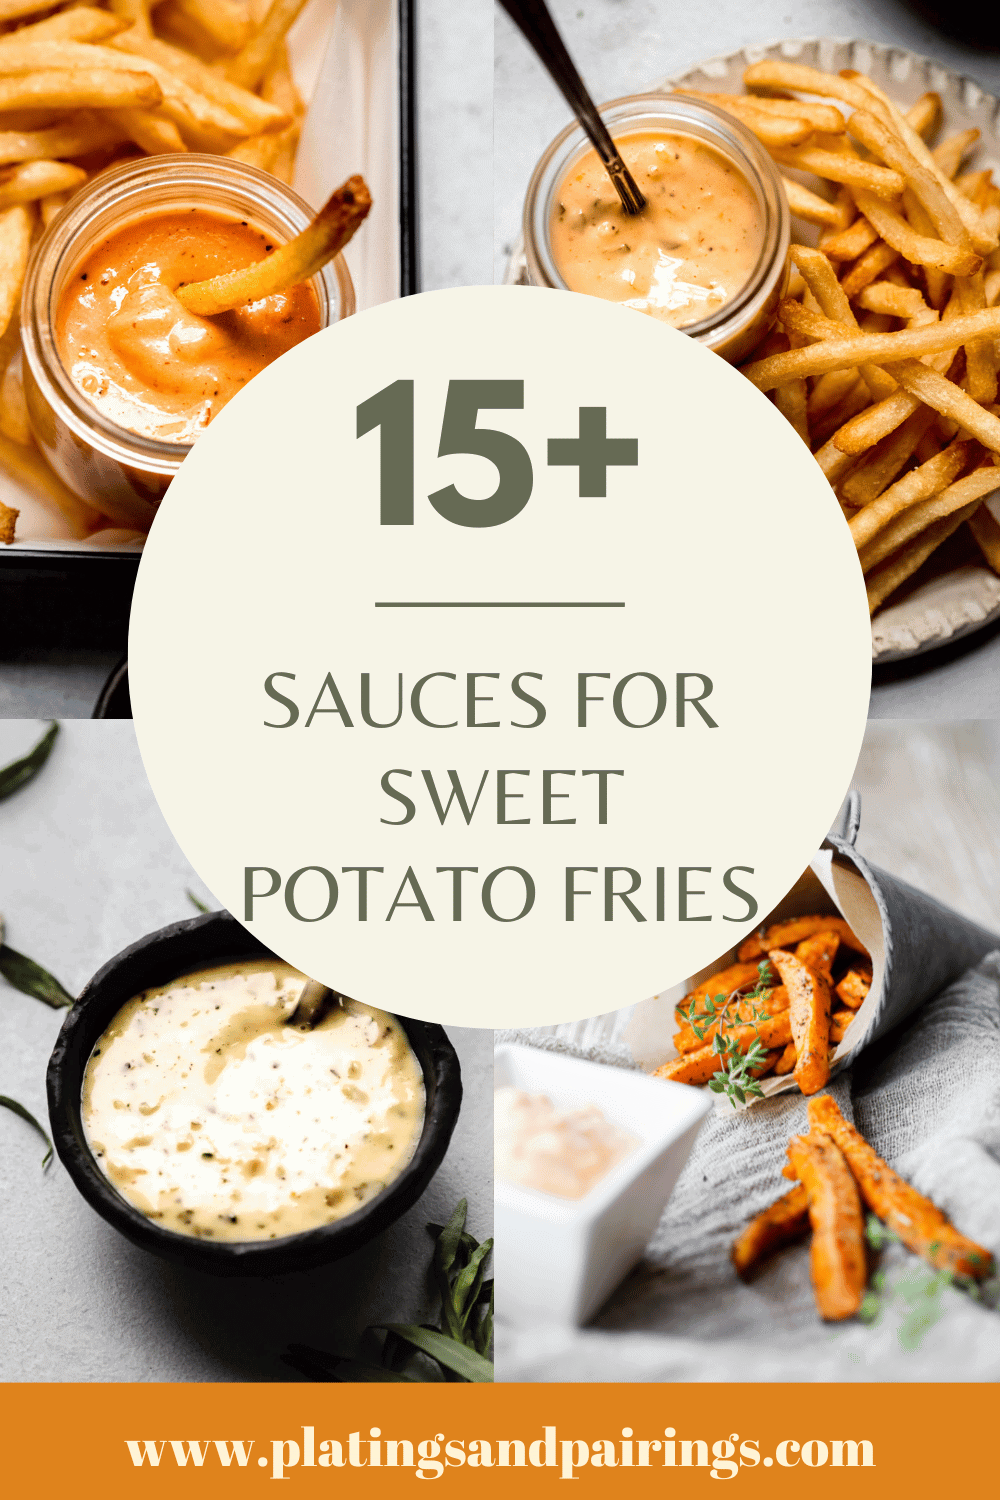 Collage of sauces for sweet potato fries with text overlay.